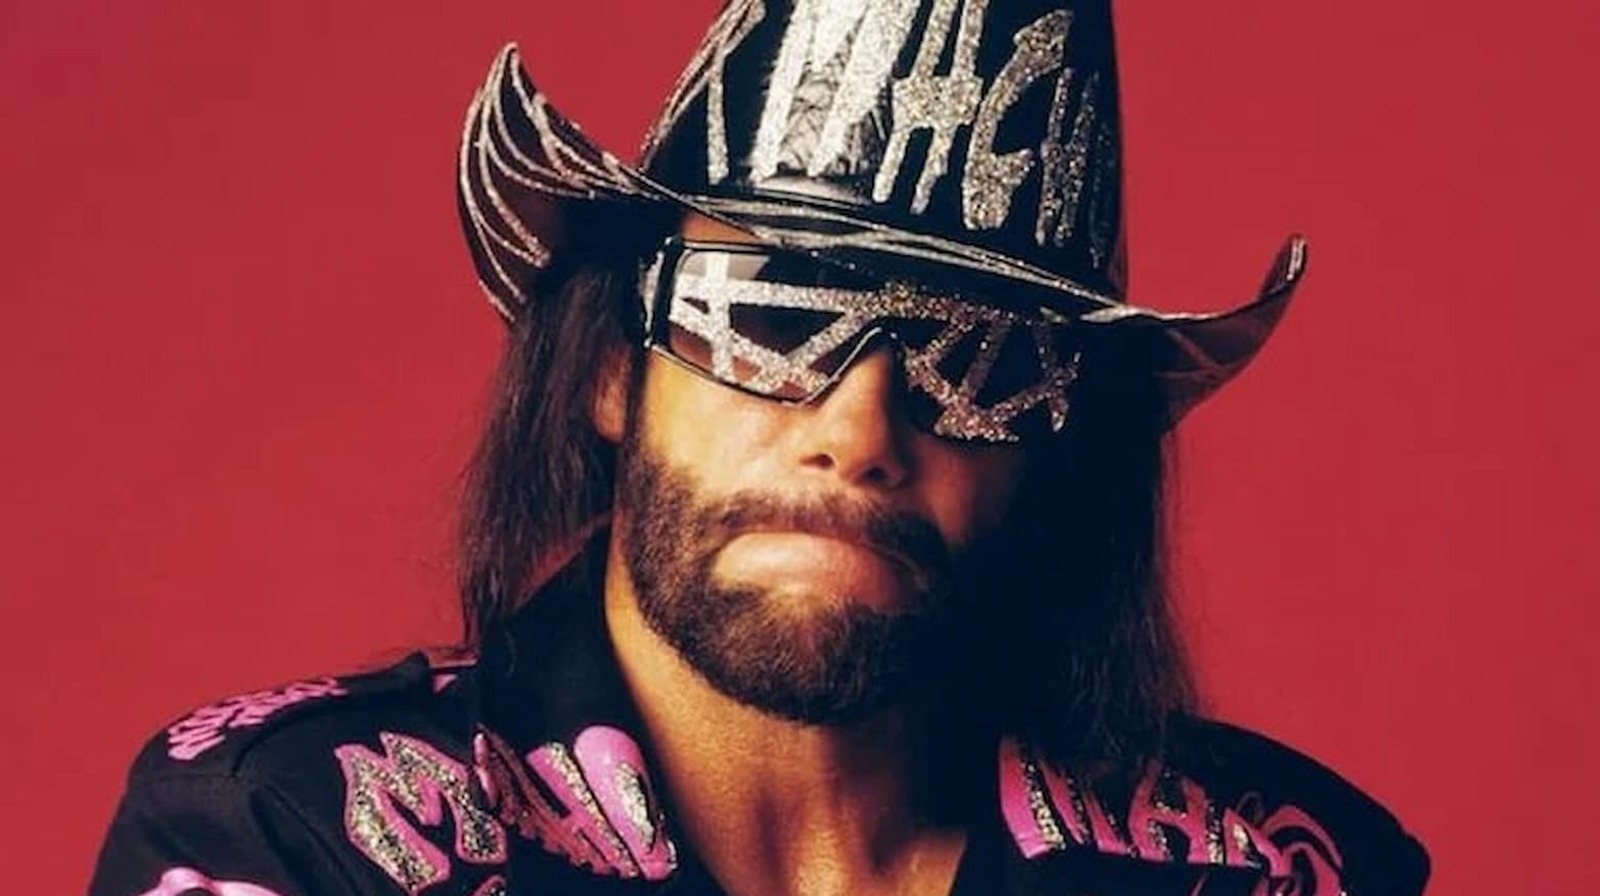 https://www.wrestlinginc.com/img/gallery/crowbar-believes-macho-man-randy-savage-would-still-hold-up-in-todays-wrestling-climate/l-intro-1677353004.jpg